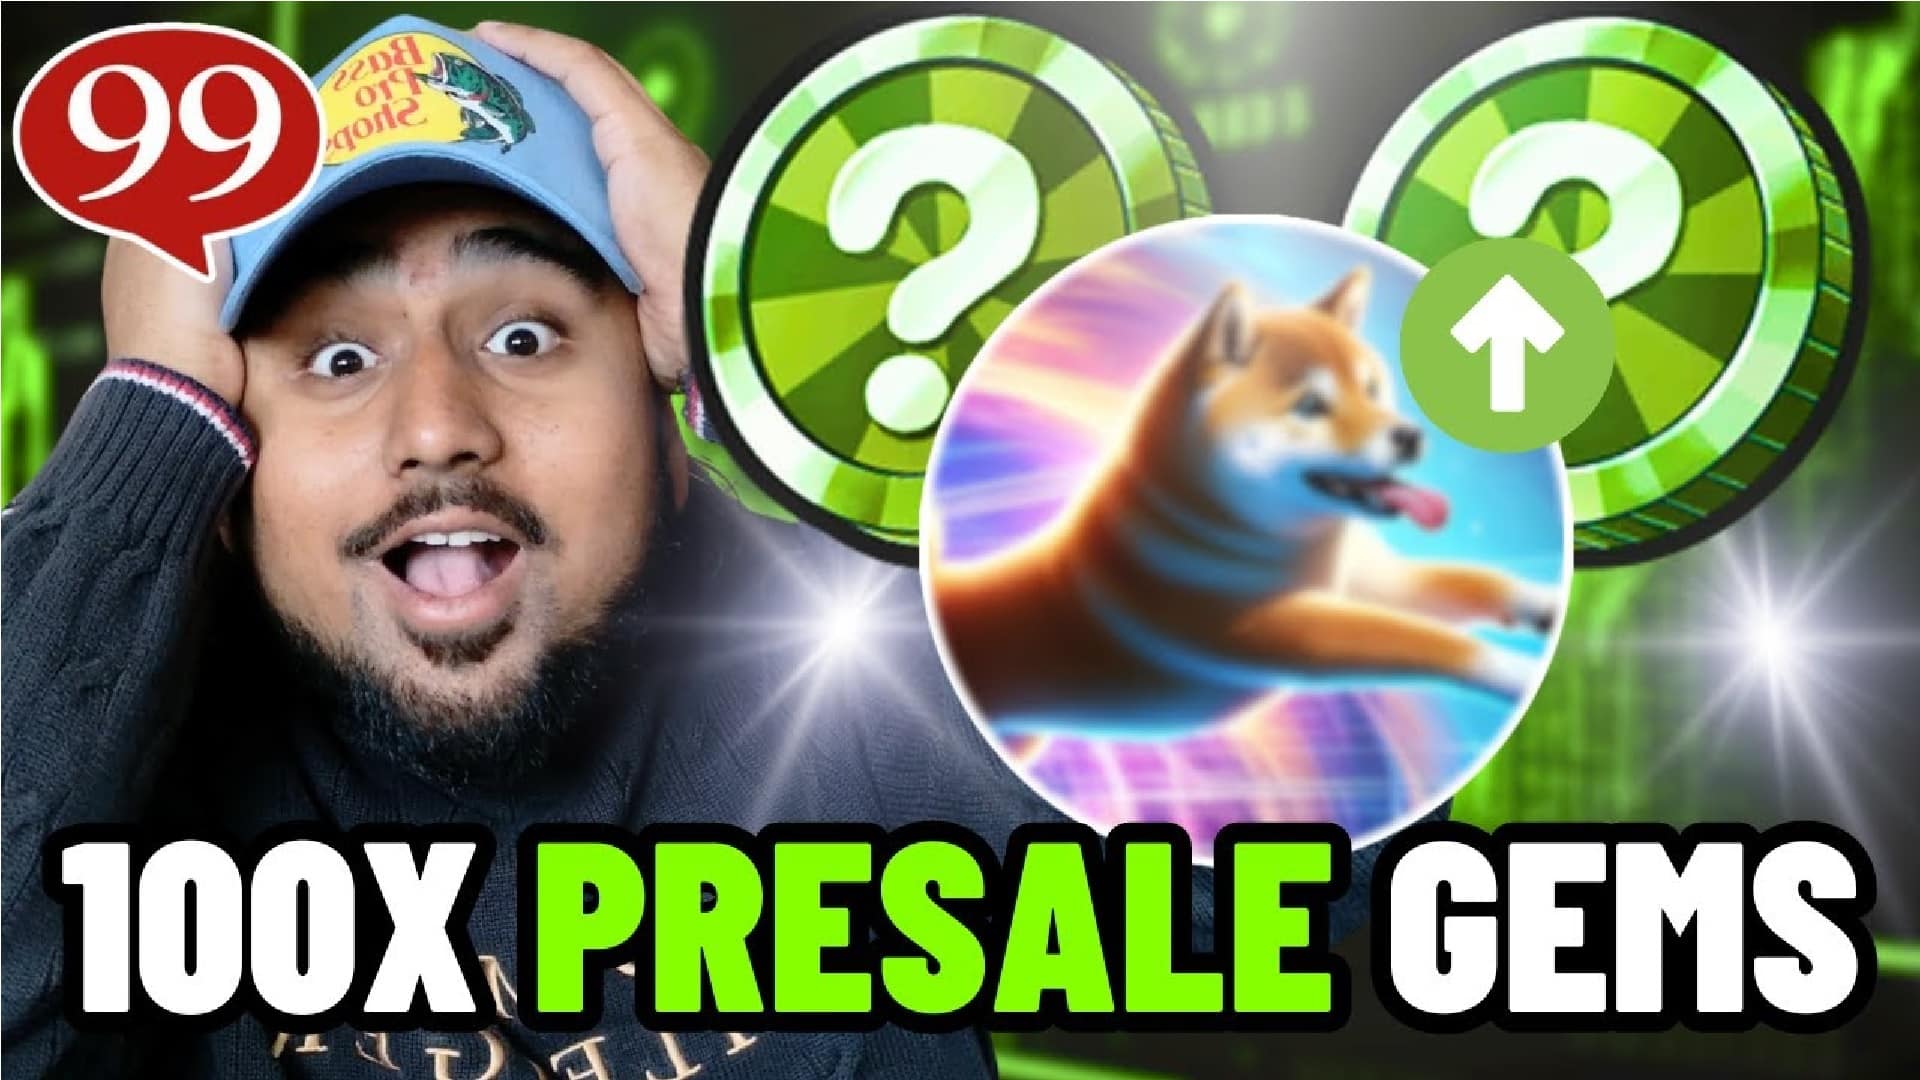 Top 3 Meme Coin Presale Gems to Buy in May with 100x Potential – $DOGEVERSE, $WAI, and $SEAL